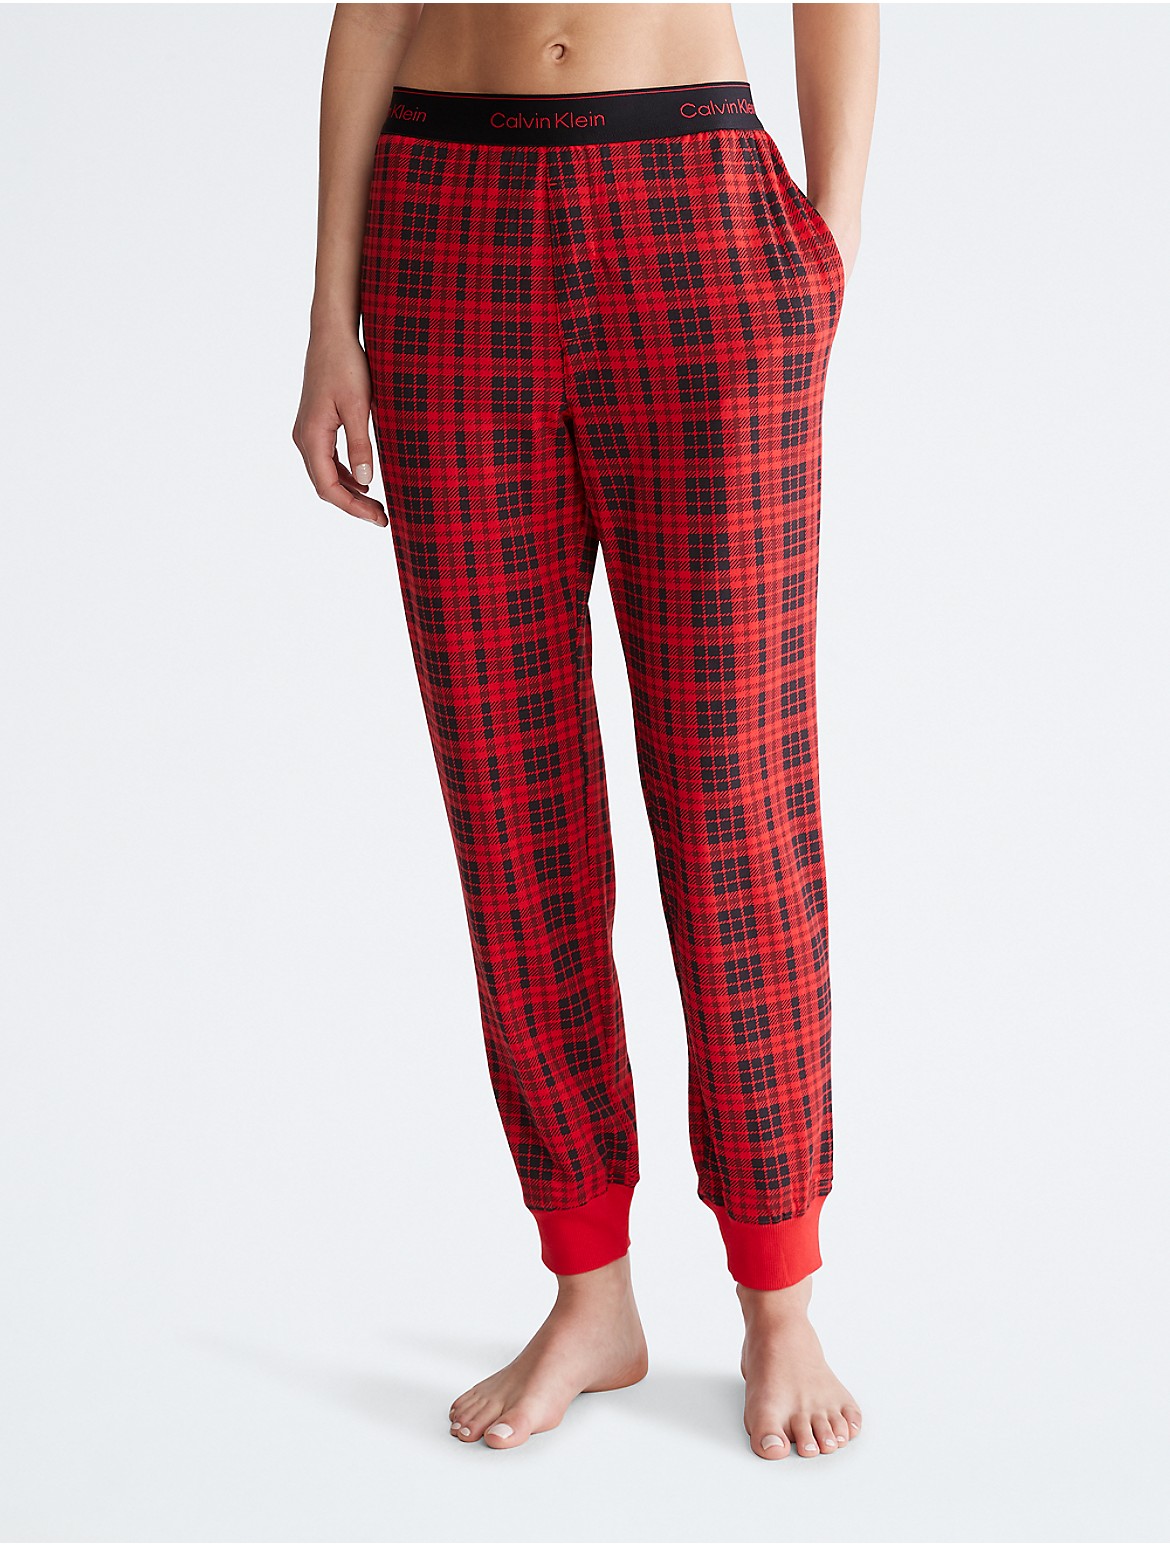 Calvin Klein Women's Modern Cotton Holiday Lounge Joggers - Red - XS